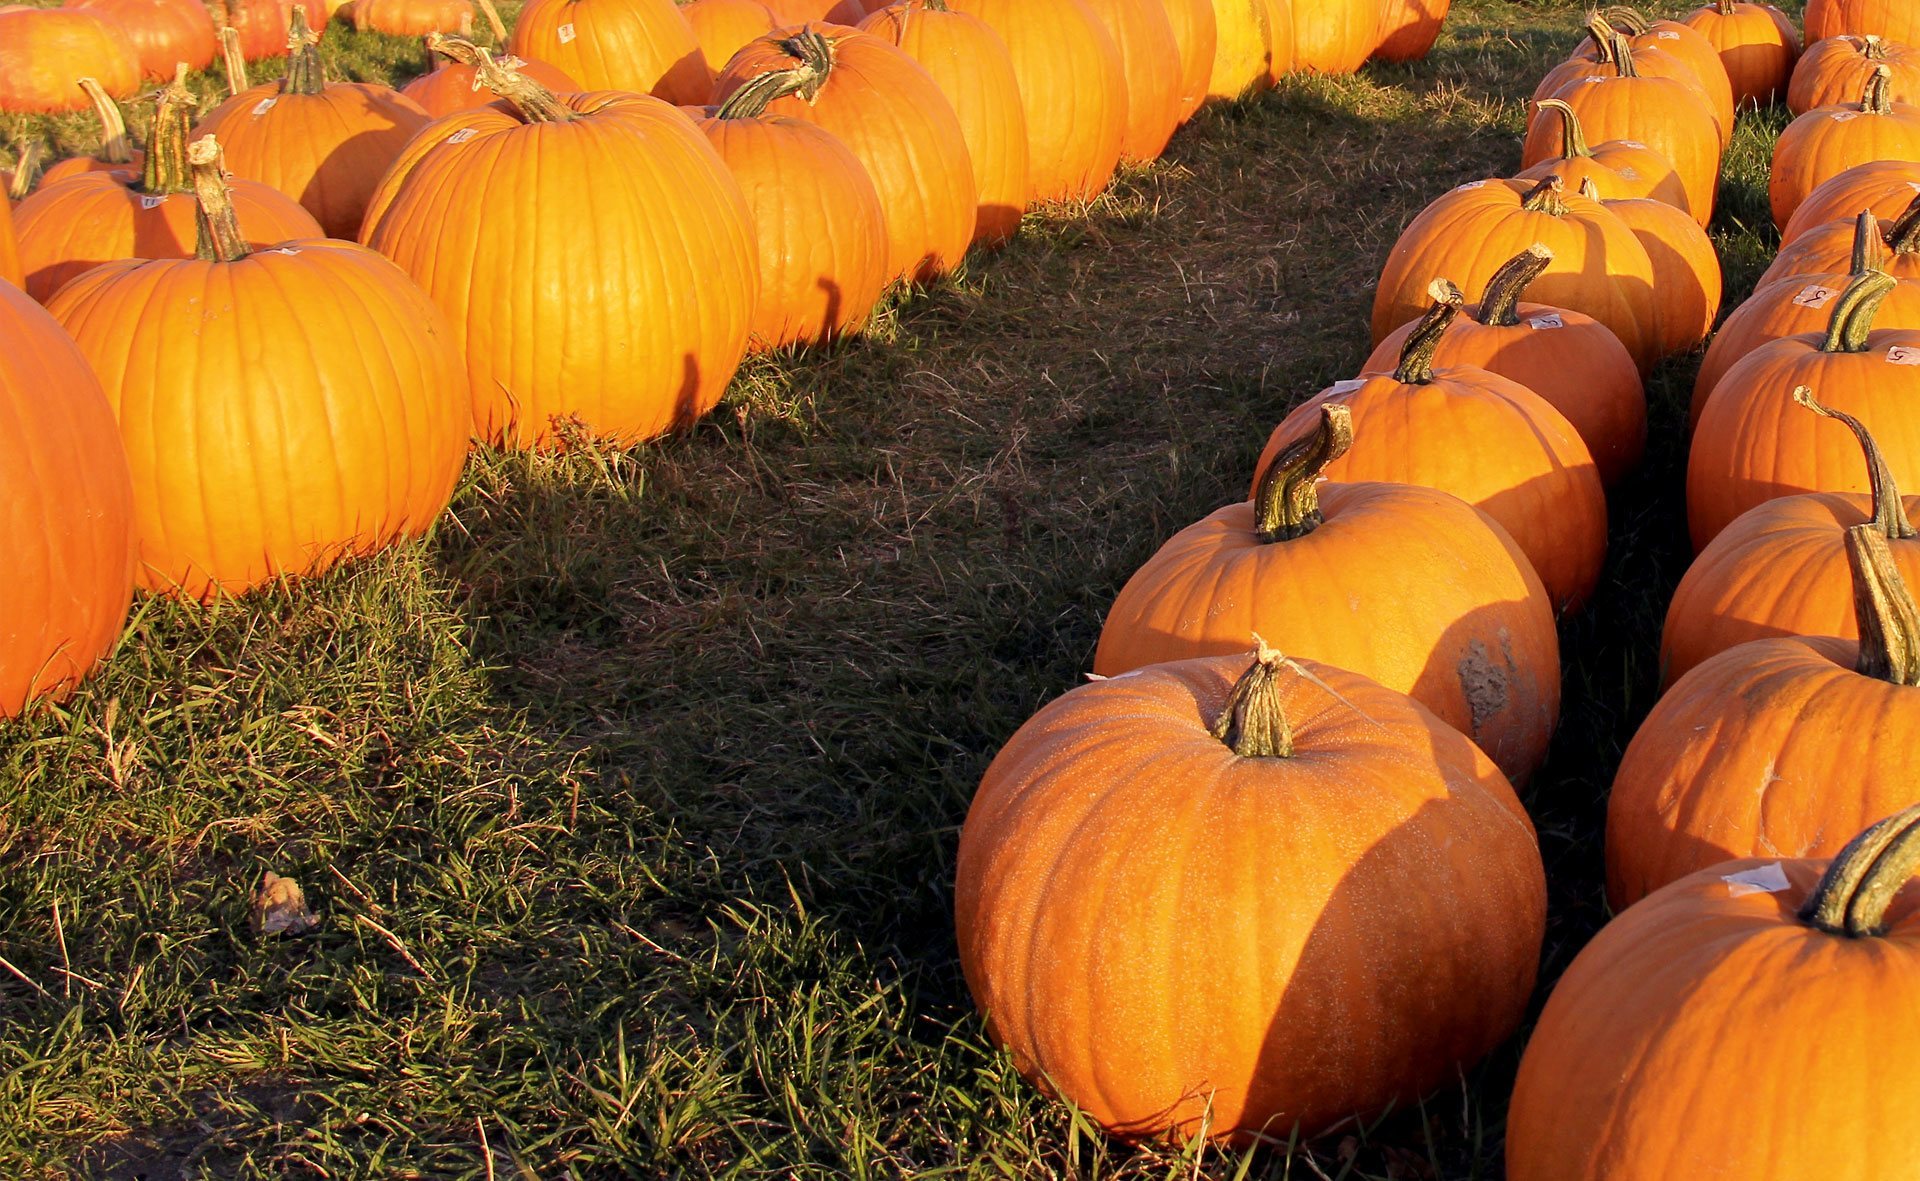 Pumpkins lined up in a field